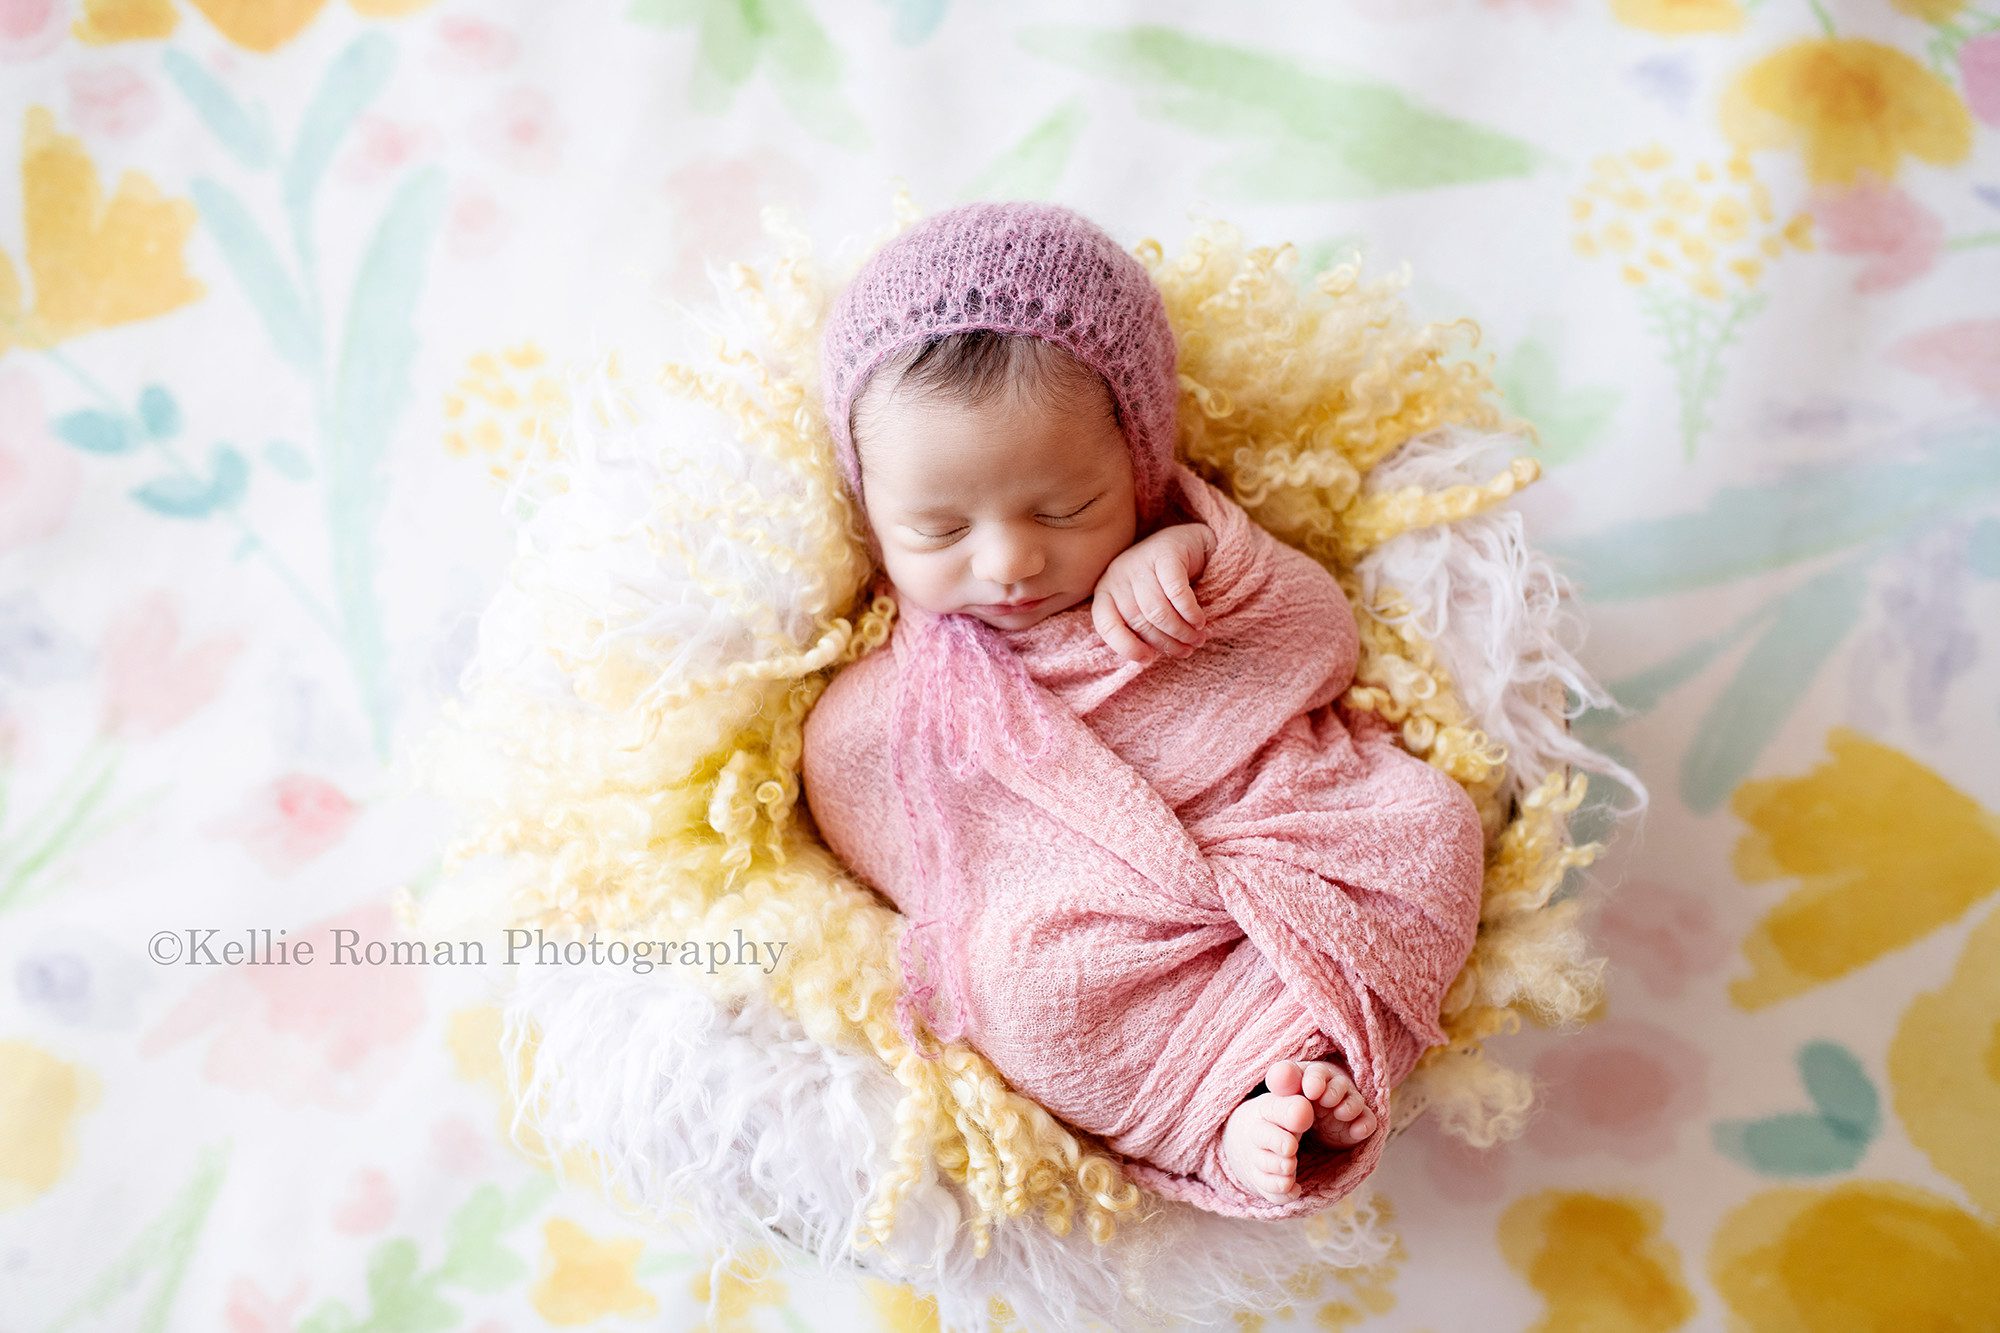 milwaukee newborn photographer. A baby girl is a milwaukee photographer studio In greendale is wrapped in a pink fabric with her toes sticking out of the bottom. She has a pink bonnet on, and is sleeping on her back in a tub with yellow and white fur. The tub is on a floor drop with pink green yellow and blue flowers on it.